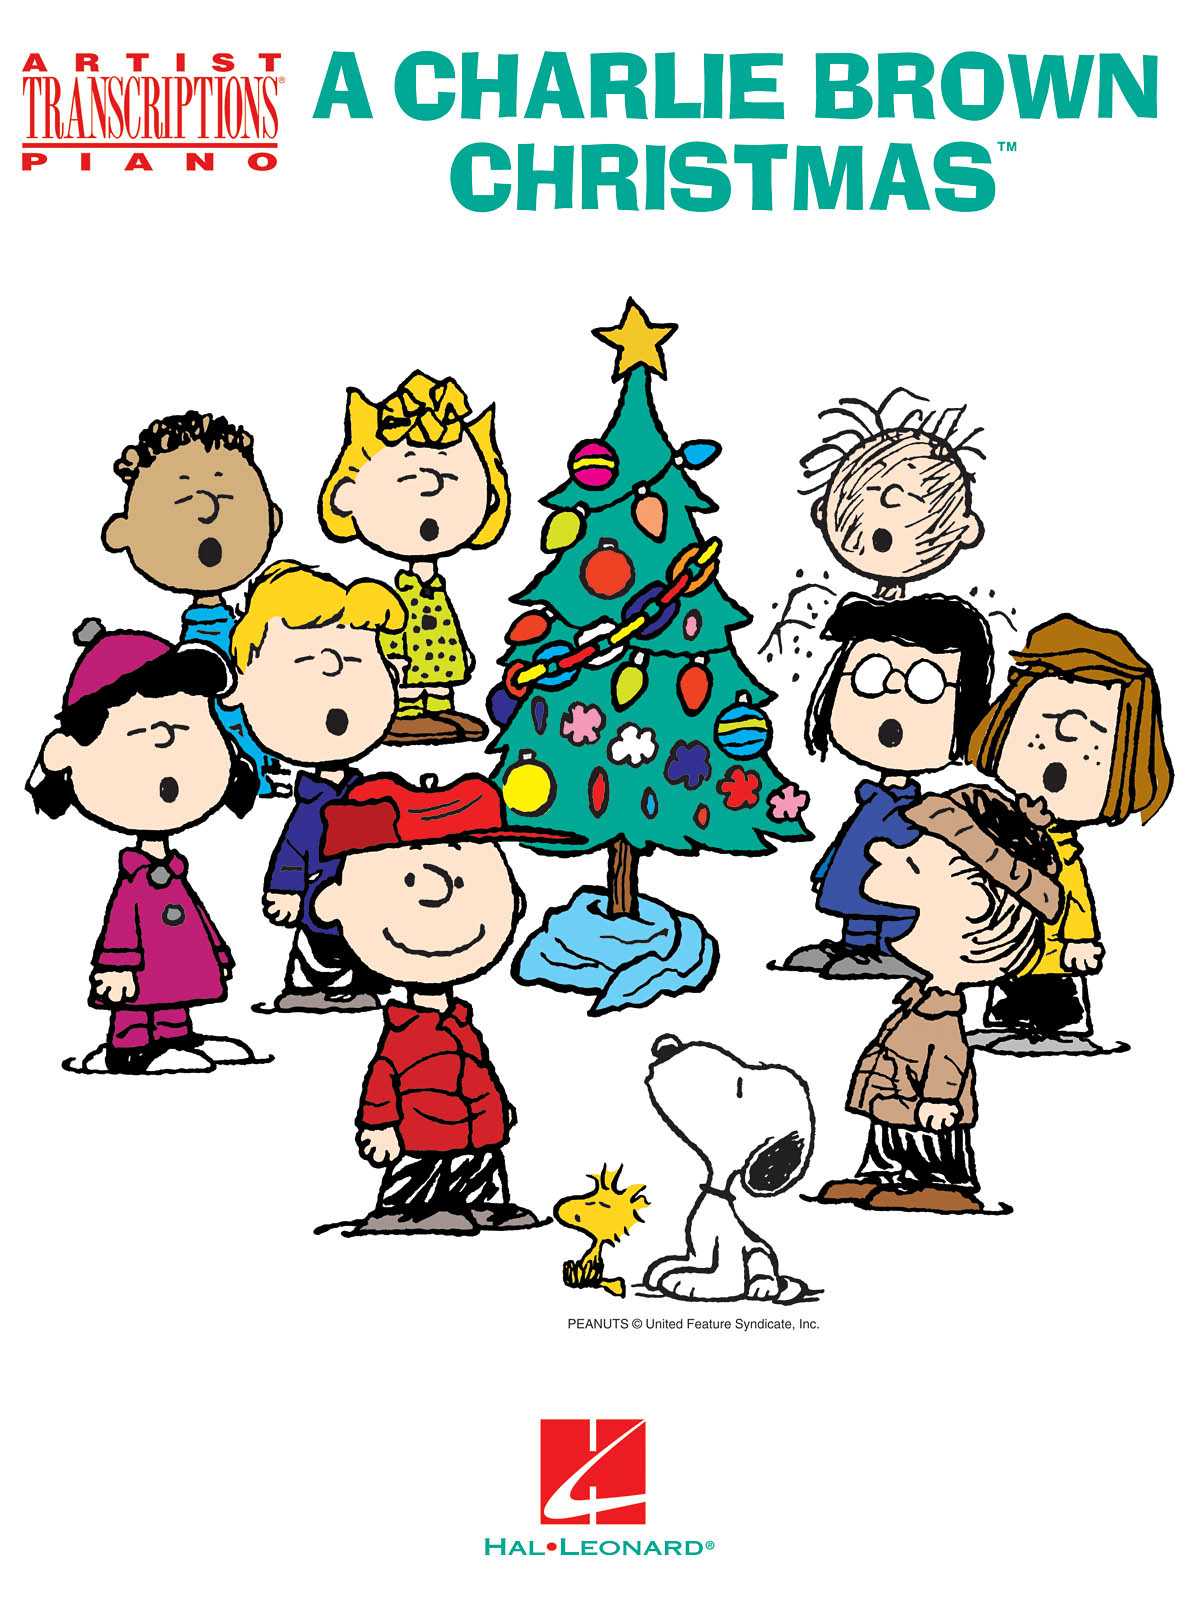 A CHARLIE BROWN CHRISTMAS: ARTIST TRANSCRIPTIONS FOR PIANO